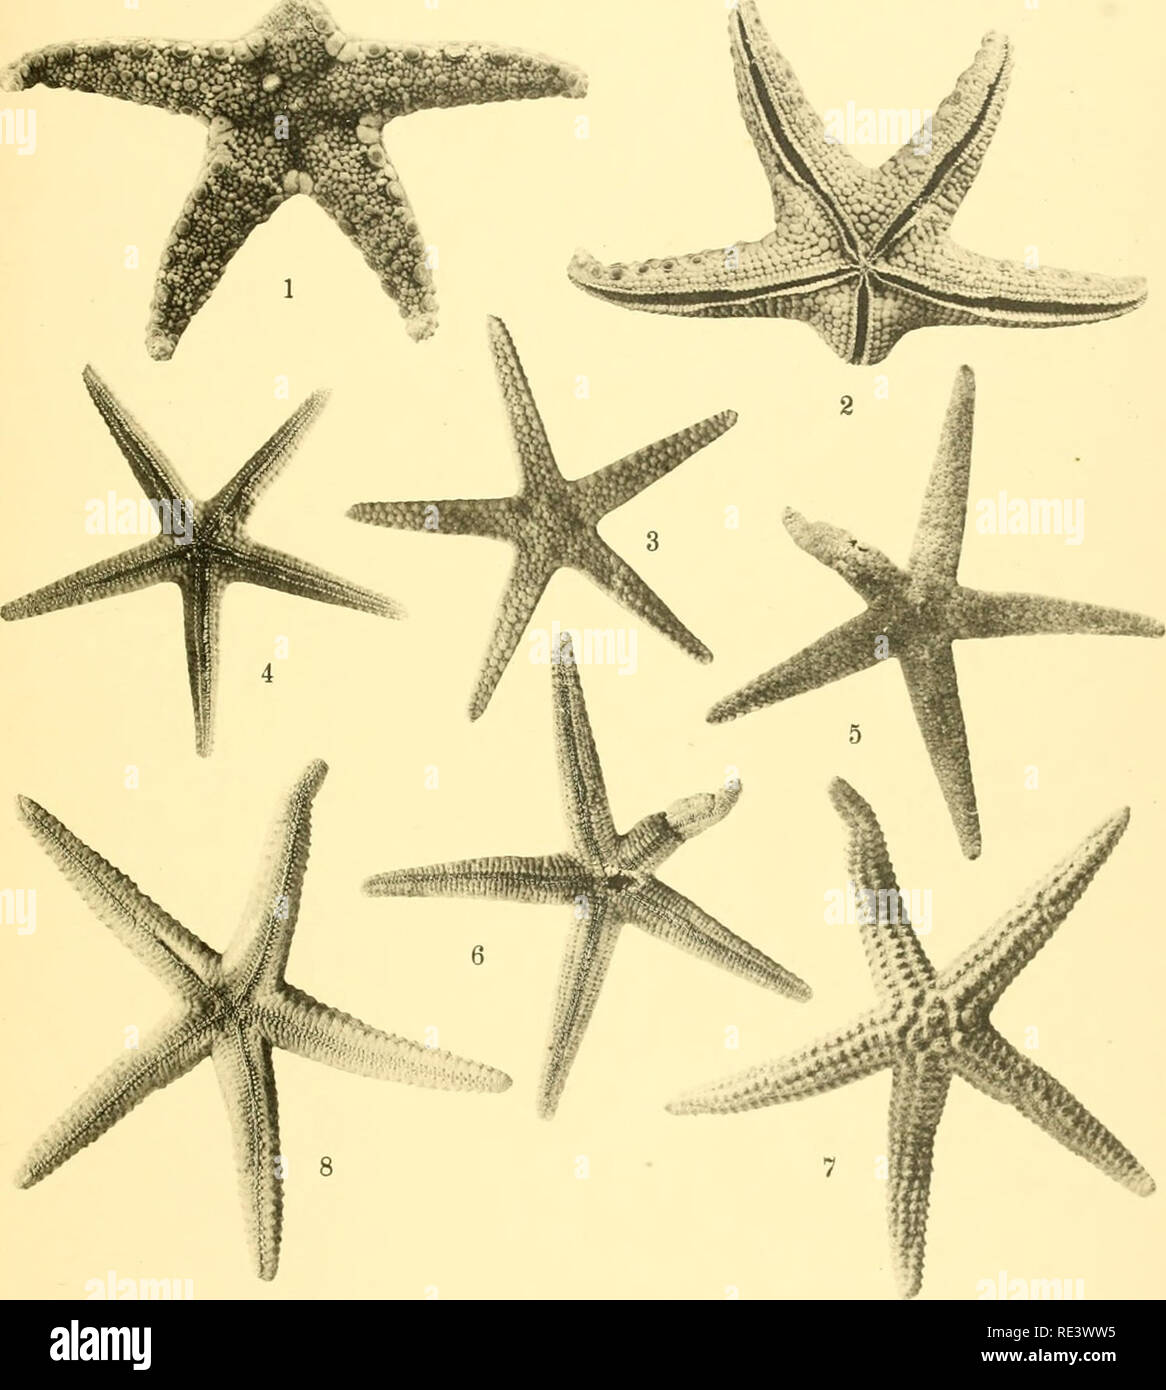 . The echinoderm fauna of Torres Strait: its composition and its origin. Echinodermata. PLATE 31. 1. Ferdina ocellata. holotype, aboral surface. X I. 2. Ferdina ocellata. holotype, oral surface. X I. 3. Fromia hadracanlha, holotype. aboral surface. X I, 4. Ftomia hadracanlha, holotype, oral surface. X |. 5. Fromia pacifica, holotype, aboral surface. X |. 6. Fromia pacifica, holotype. oral surface. X I. 7. Tamaria lithosora, holotype, aboral surface. X I. 8. Tamaria lithosora, holotype. oral surface. X 1.. Please note that these images are extracted from scanned page images that may have been d Stock Photo